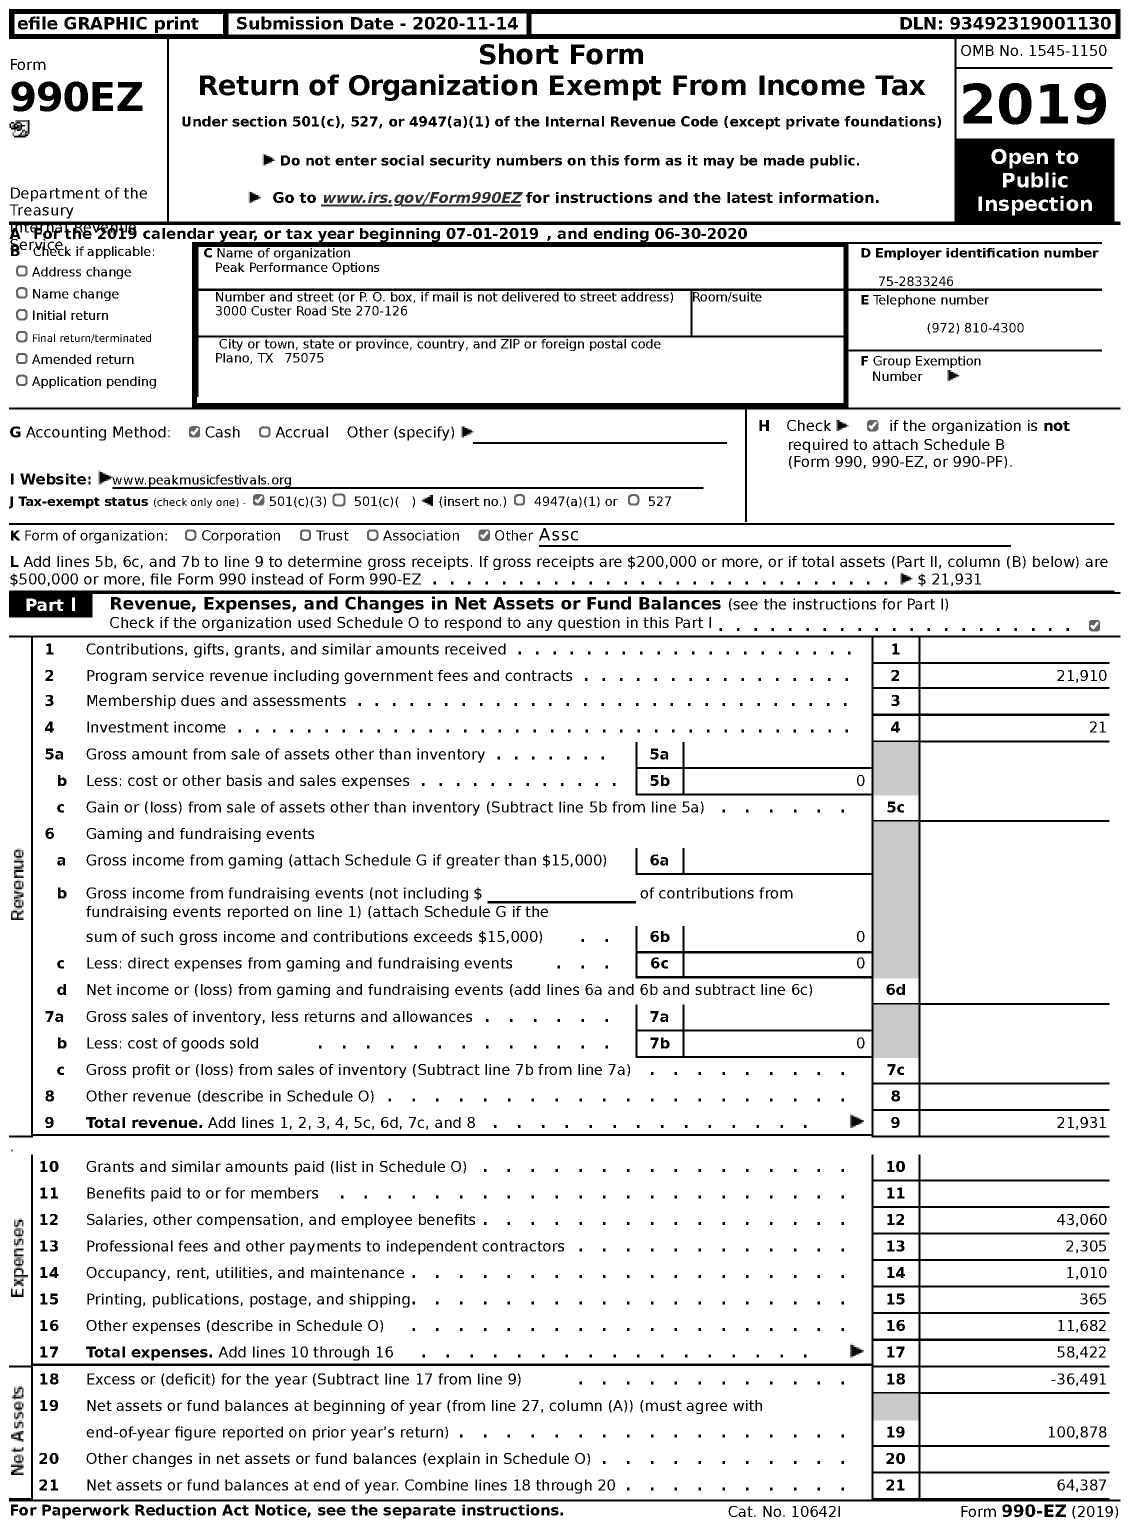 Image of first page of 2019 Form 990EZ for Peak Performance Options